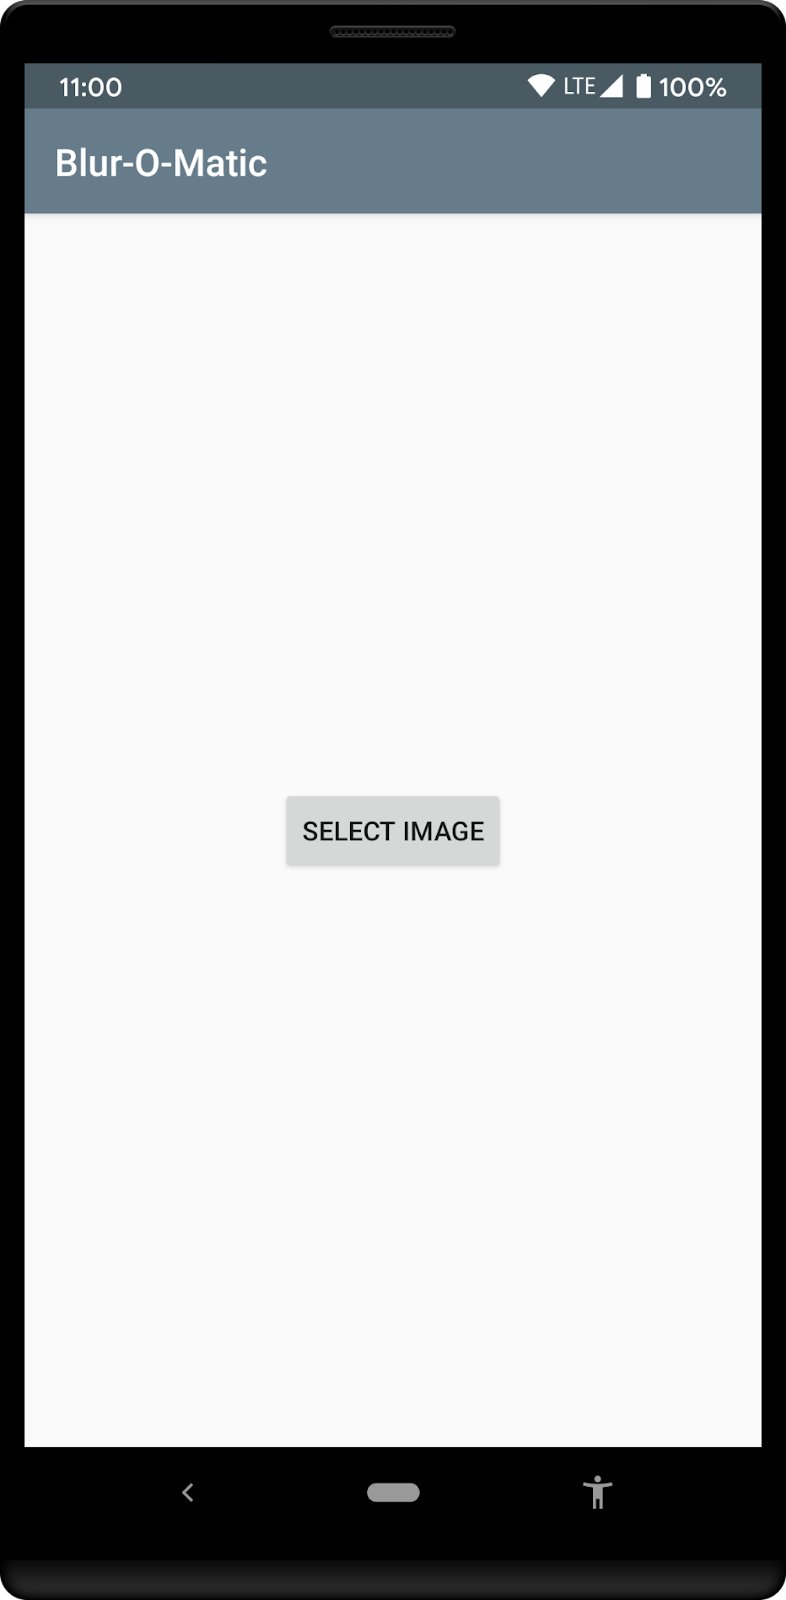 Starting screen of app that prompts user to select an image from the photo gallery.